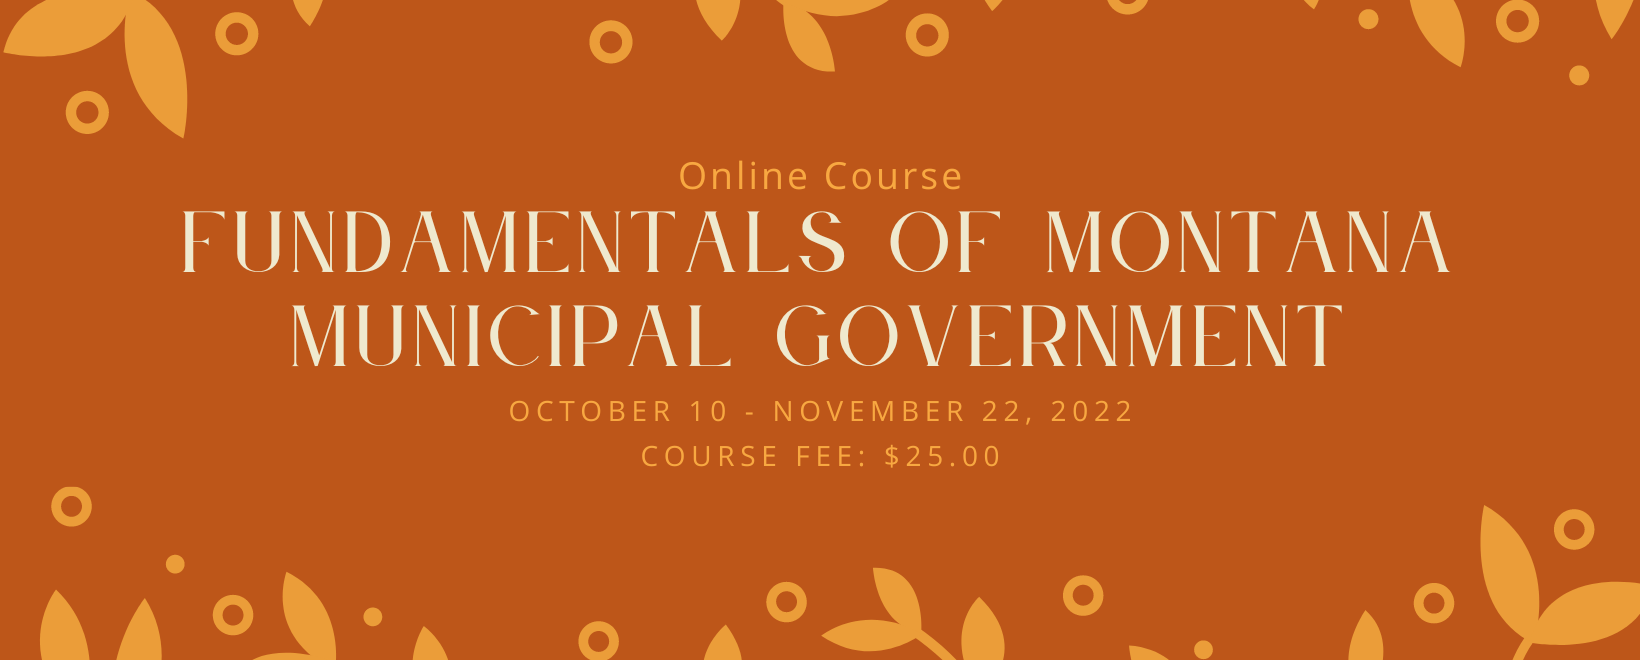 Fundamentals of Montana Municipal Government Online Course banner. January 24th - March 8th, 2022. Course fee $25.00